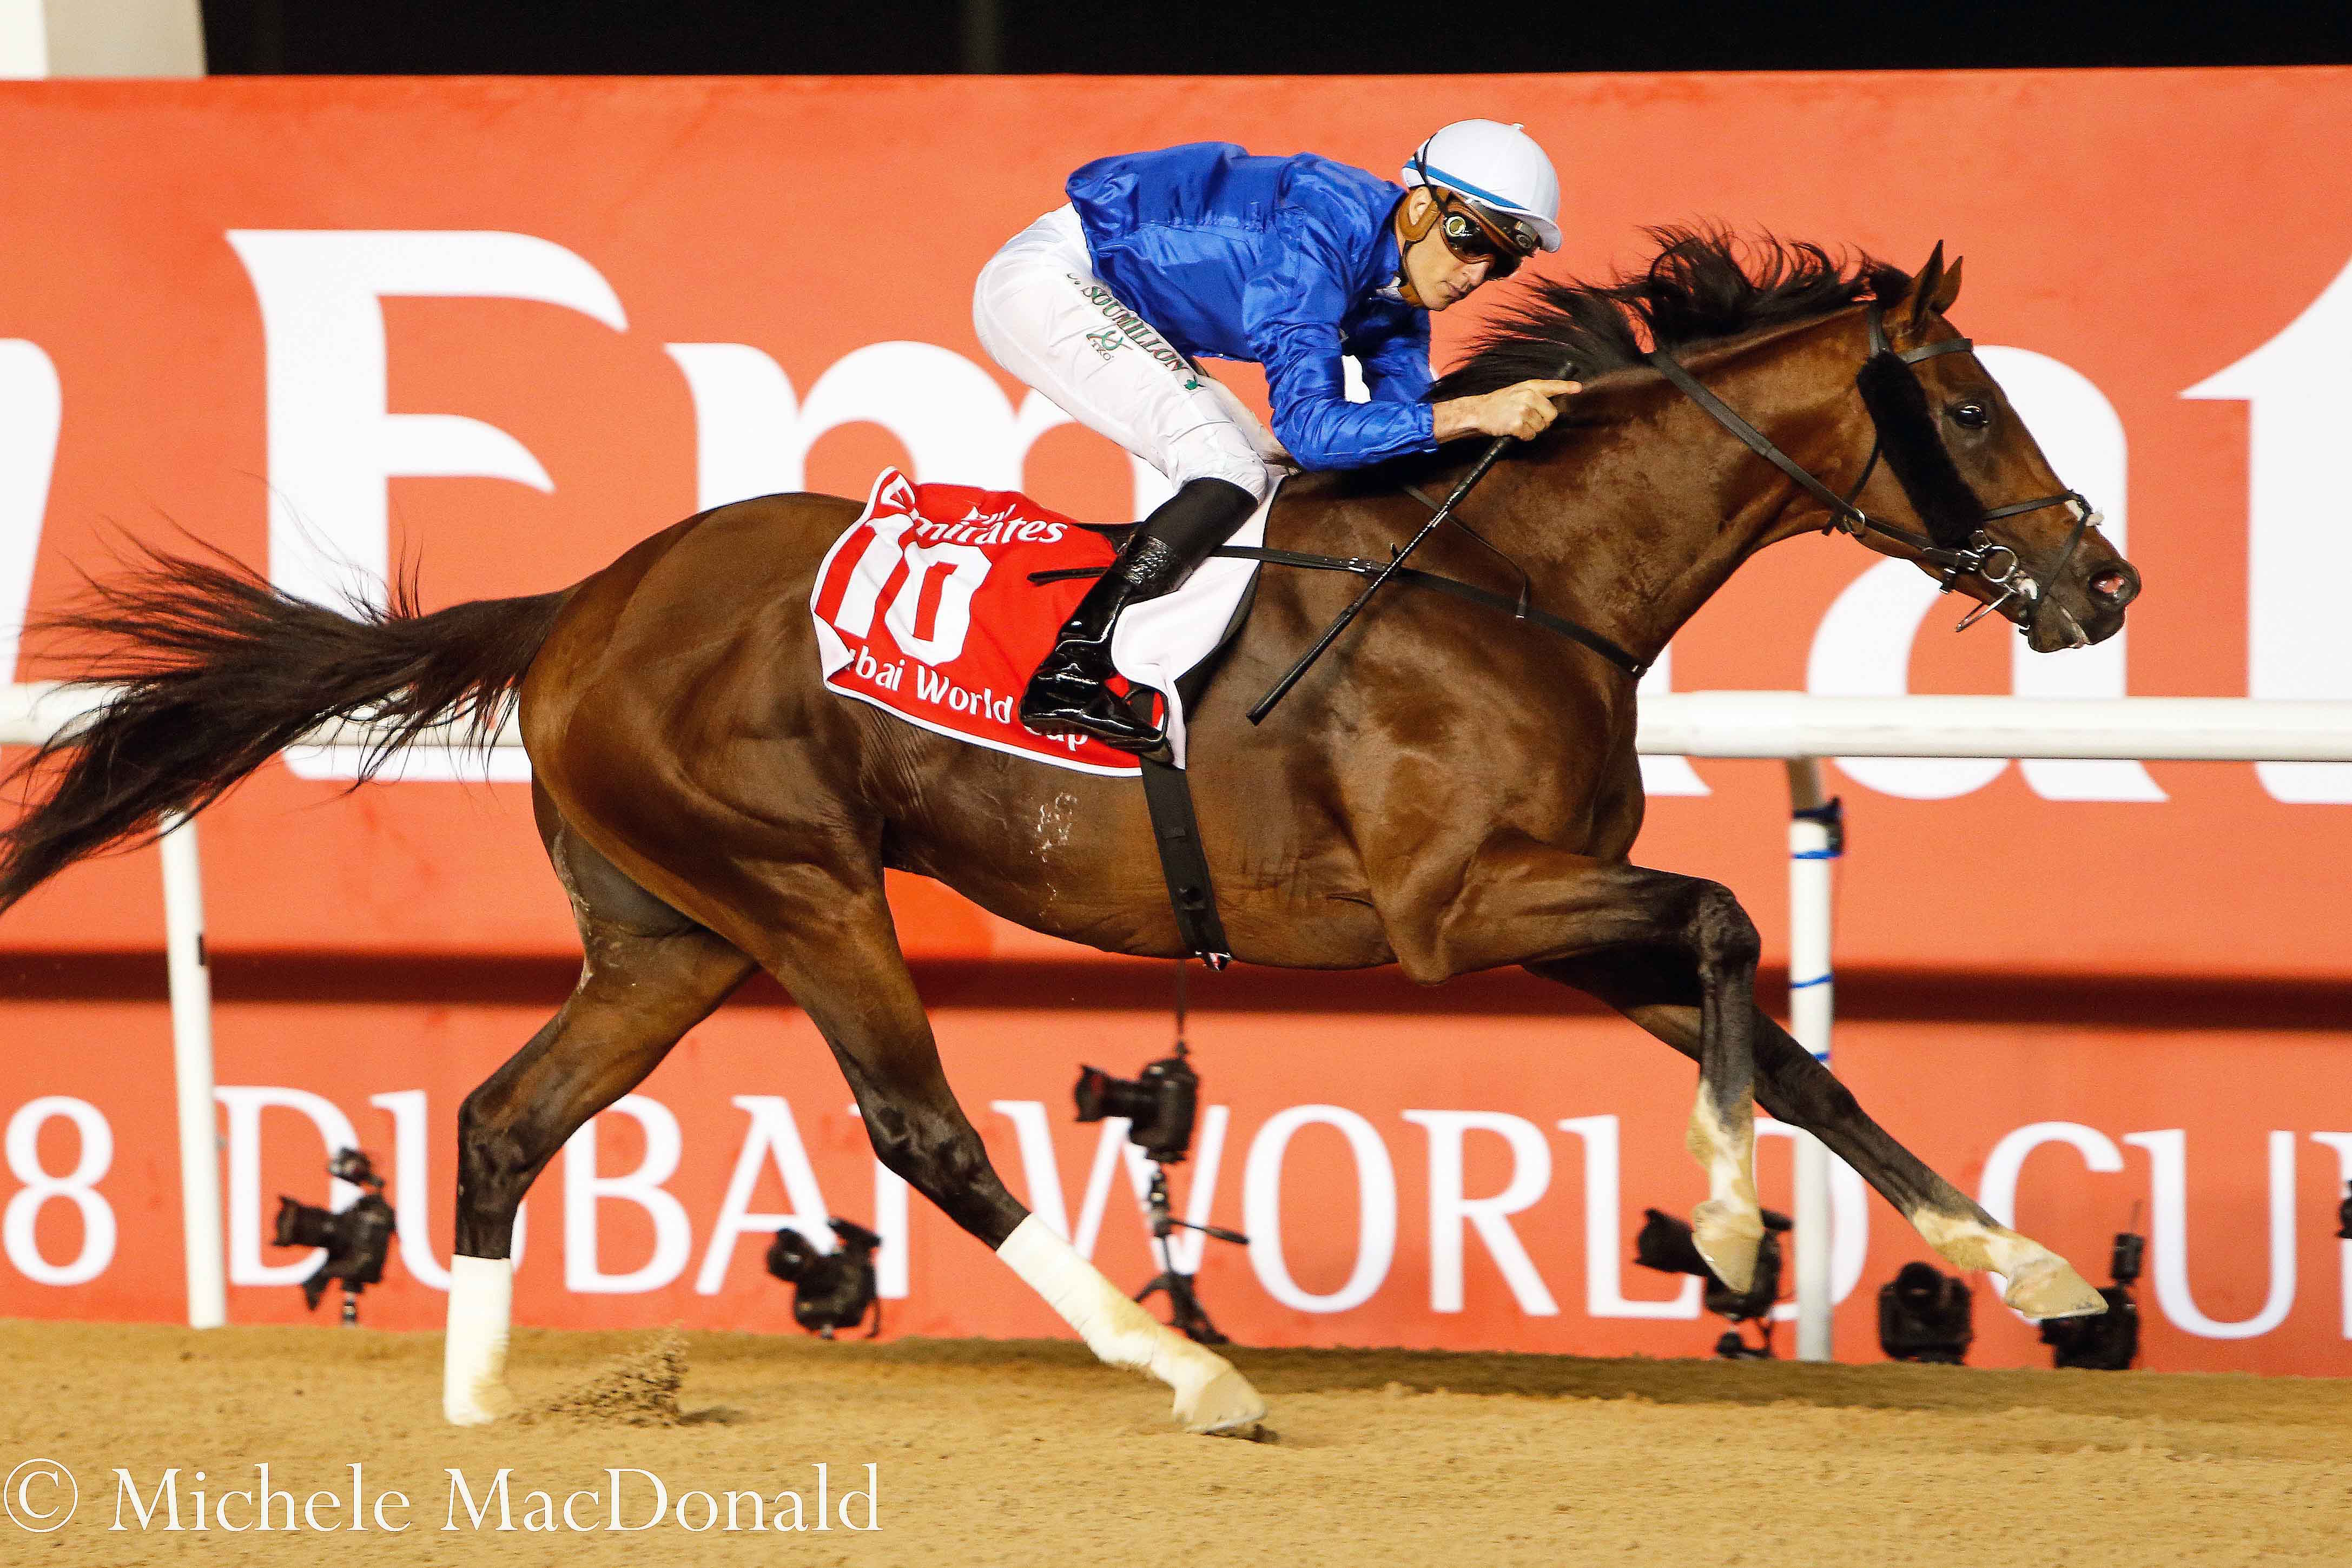 Thunder Snow comes home unchallenged in the Dubai World Cup on the Meydan dirt. He has already won two G1s on turf (including one on very soft ground). Photo: Michele MacDonald